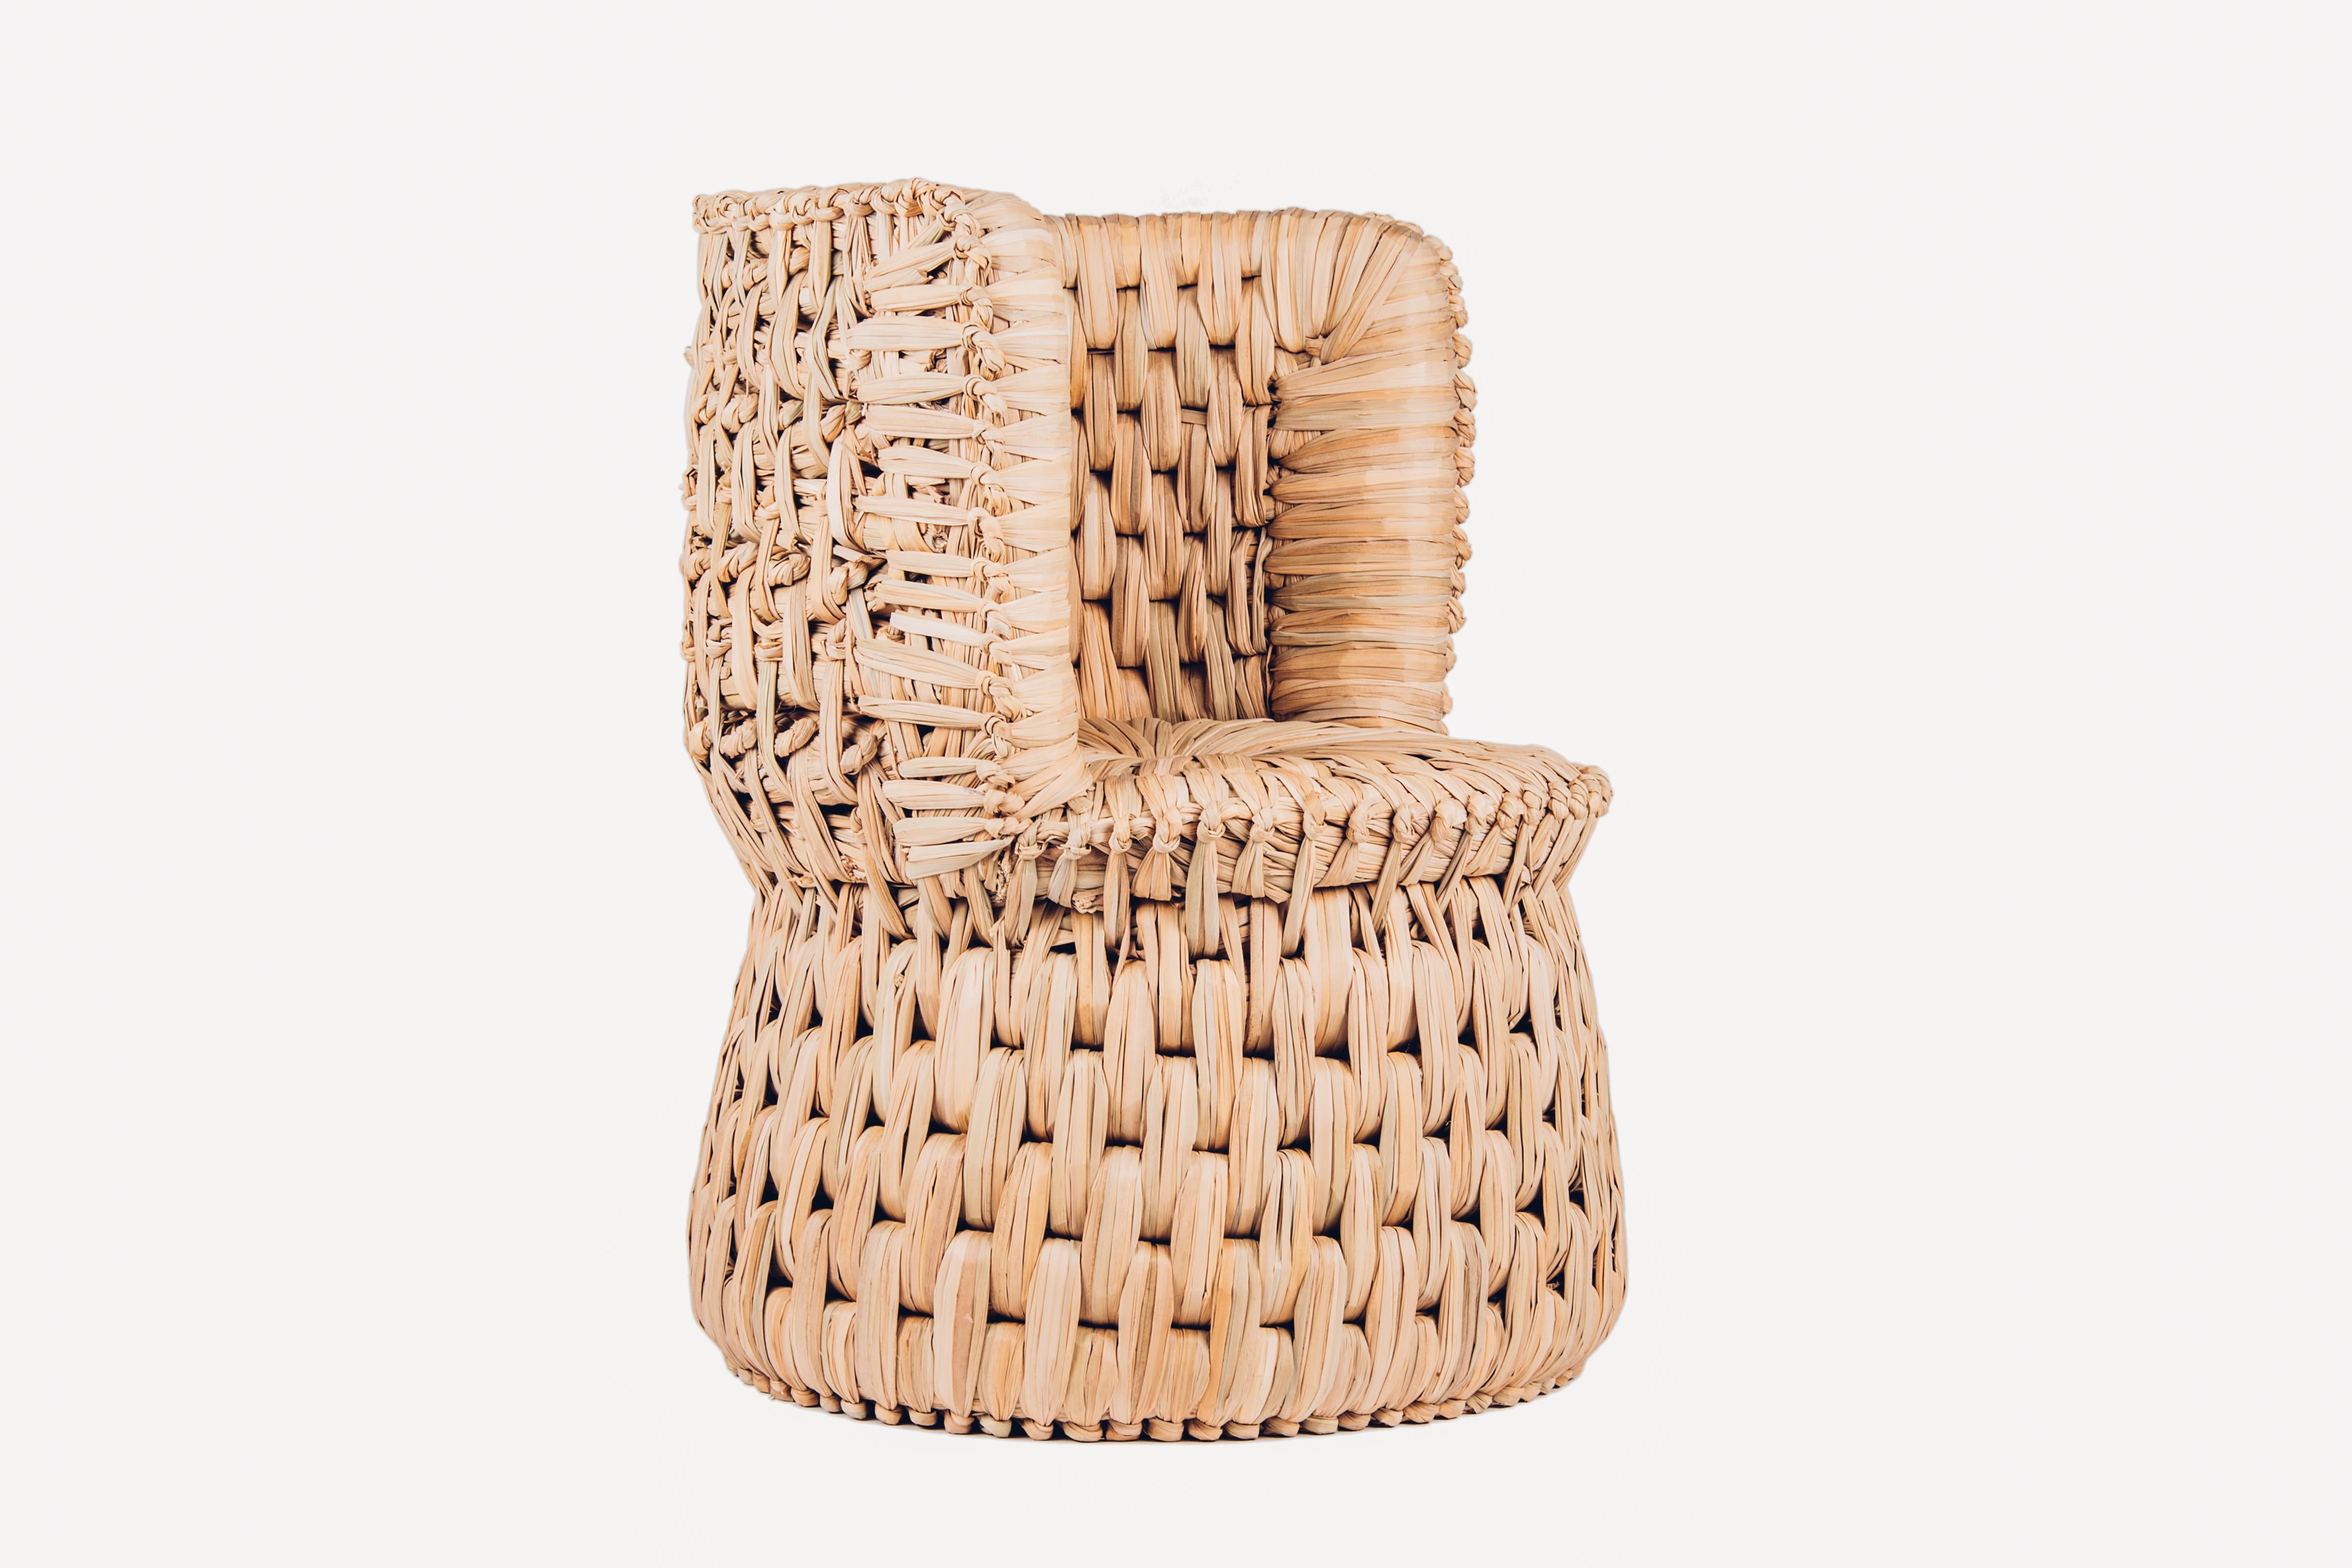 From a craft object to relevant design, these special pieces that are made in Mexico, were created to add warmth and texture to your interior. Intended for indoor or covered outdoor use, they are a reminder of the incredible workmanship and know-how